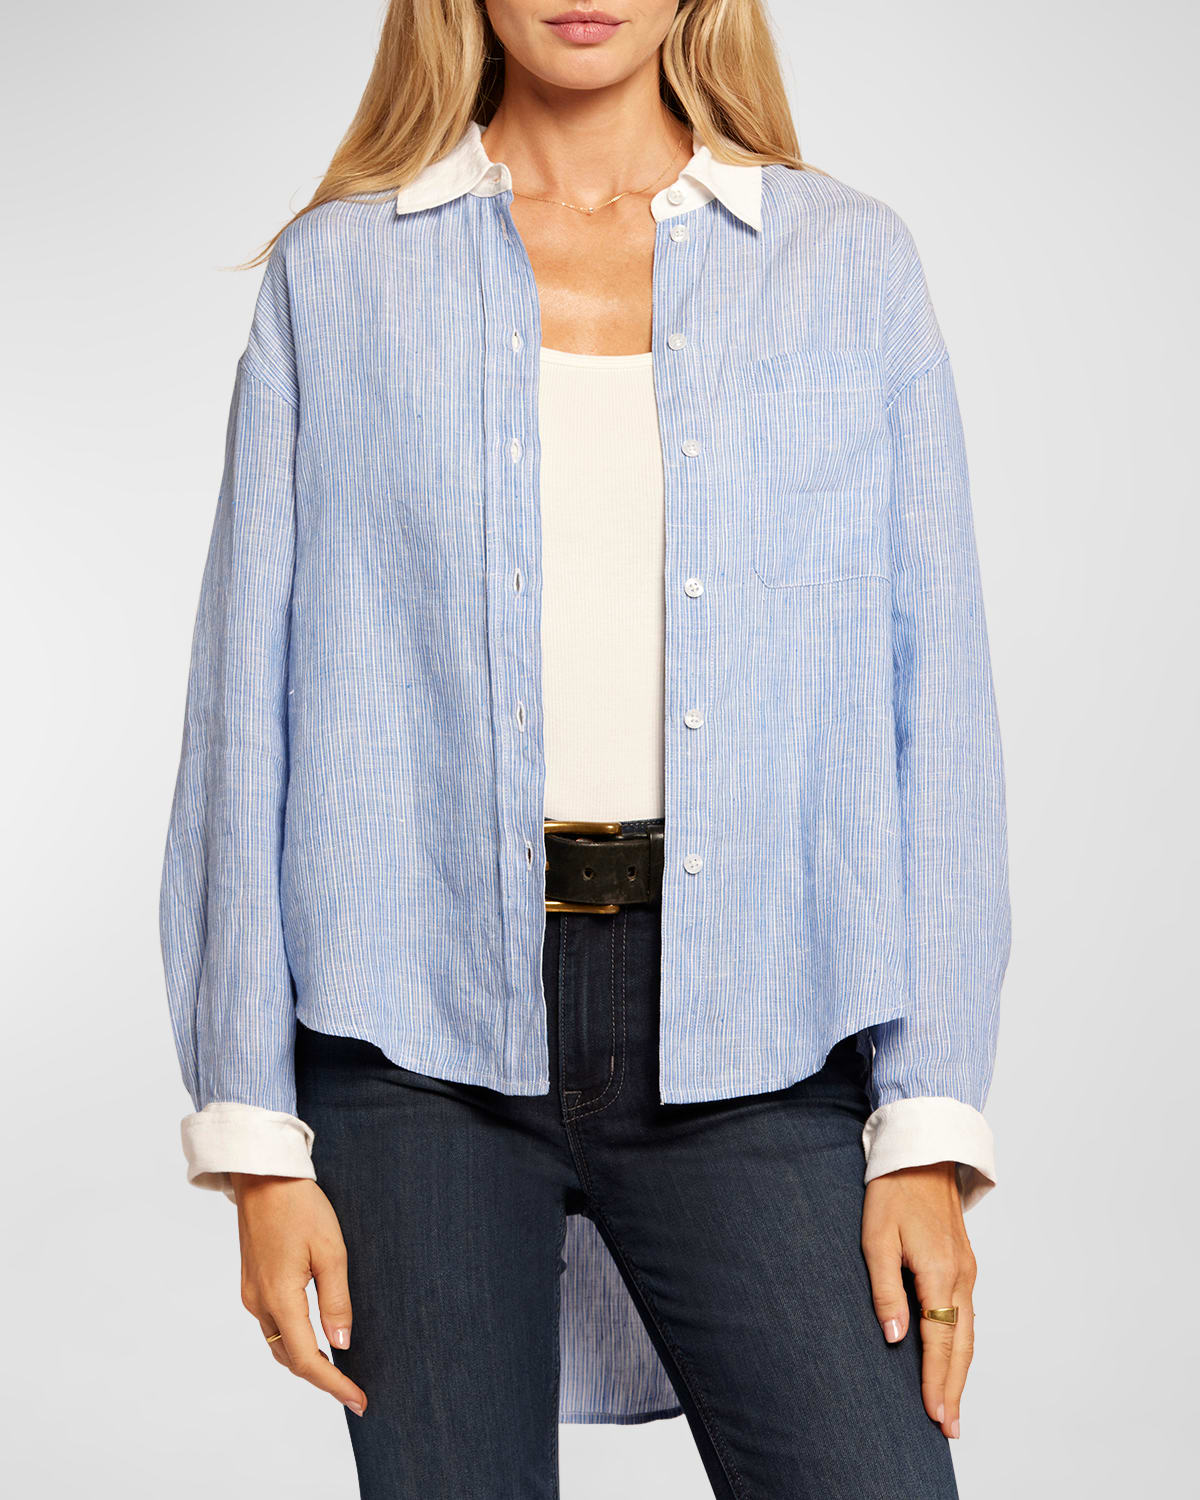 The Candid Striped Button-Front Shirt